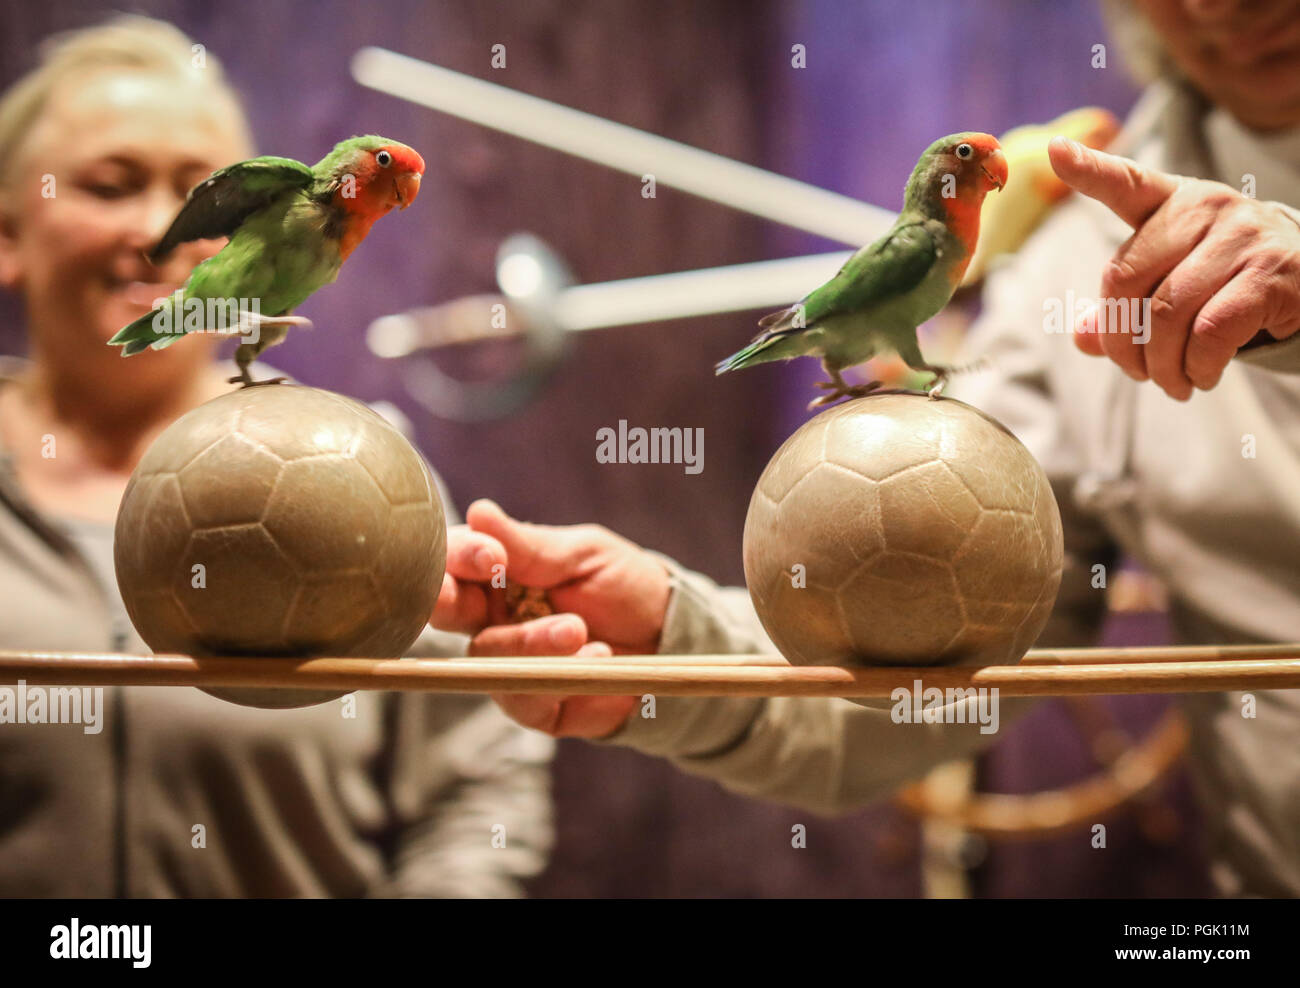 24 July 2018, Weilrod-Hasselbach, Germany: Two lovebirds (Agapornis), a species of small African parrots, are balancing on small footballs during a demonstration in the 'Parrot School' in the bird castle. Parrots, which were delivered by private owners for the different reasons, are offered accommodation in the plant. The bird sanctuary in Hochtaunus has existed since 1981. At present about 700 birds live here. Photo: Frank Rumpenhorst/dpa Stock Photo